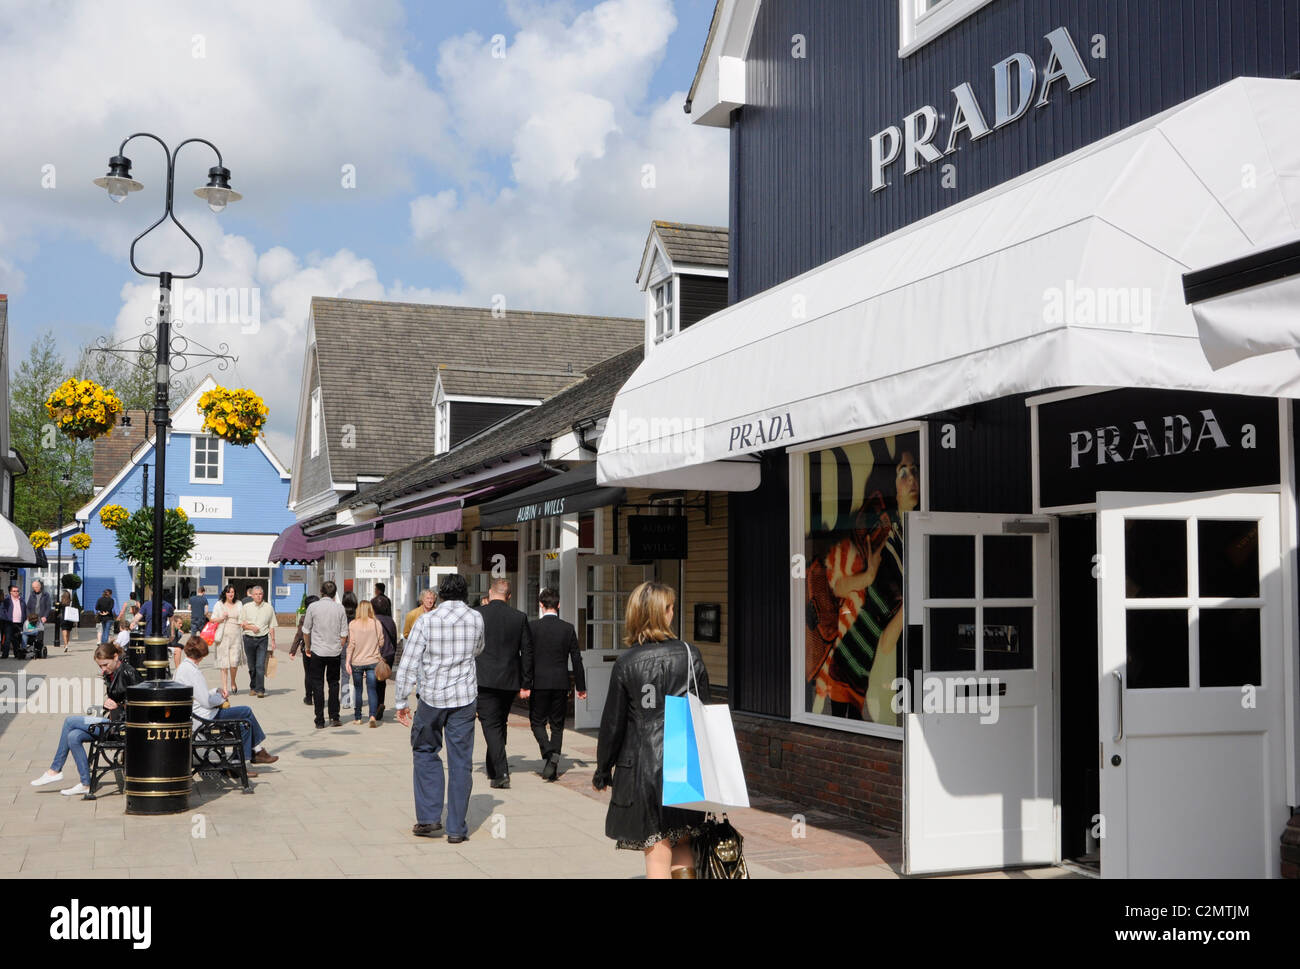 Bicester Village, claimed to be the leading Designer outlet shopping destination in Europe. Bicester. Oxfordshire, England. Stock Photo